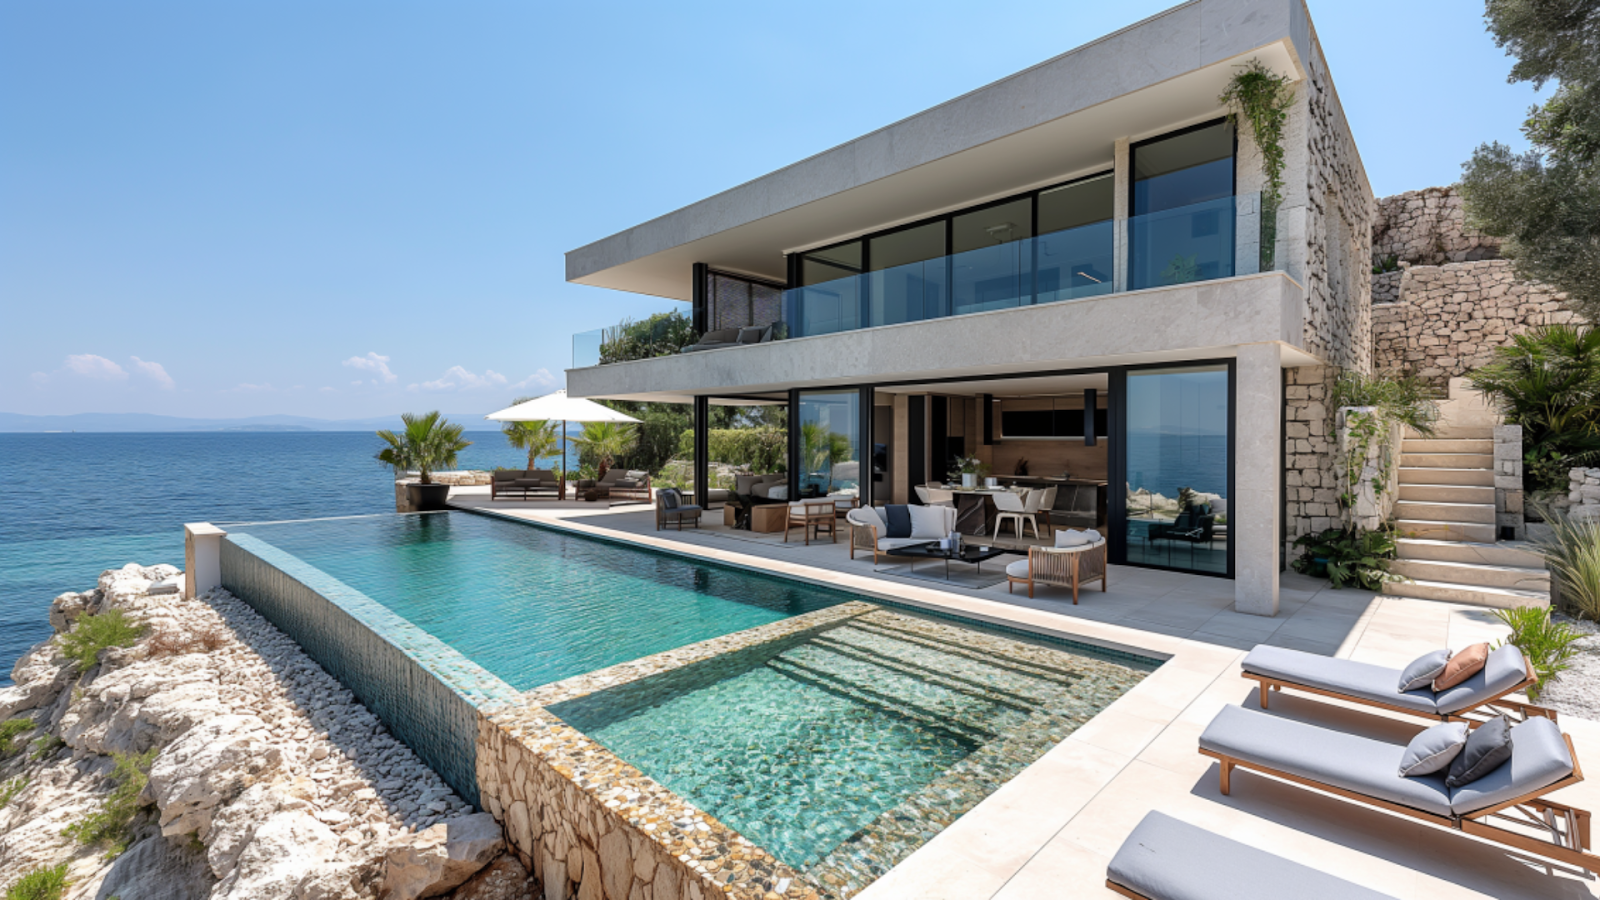 A chic villa with modern interiors and sea views in Split.